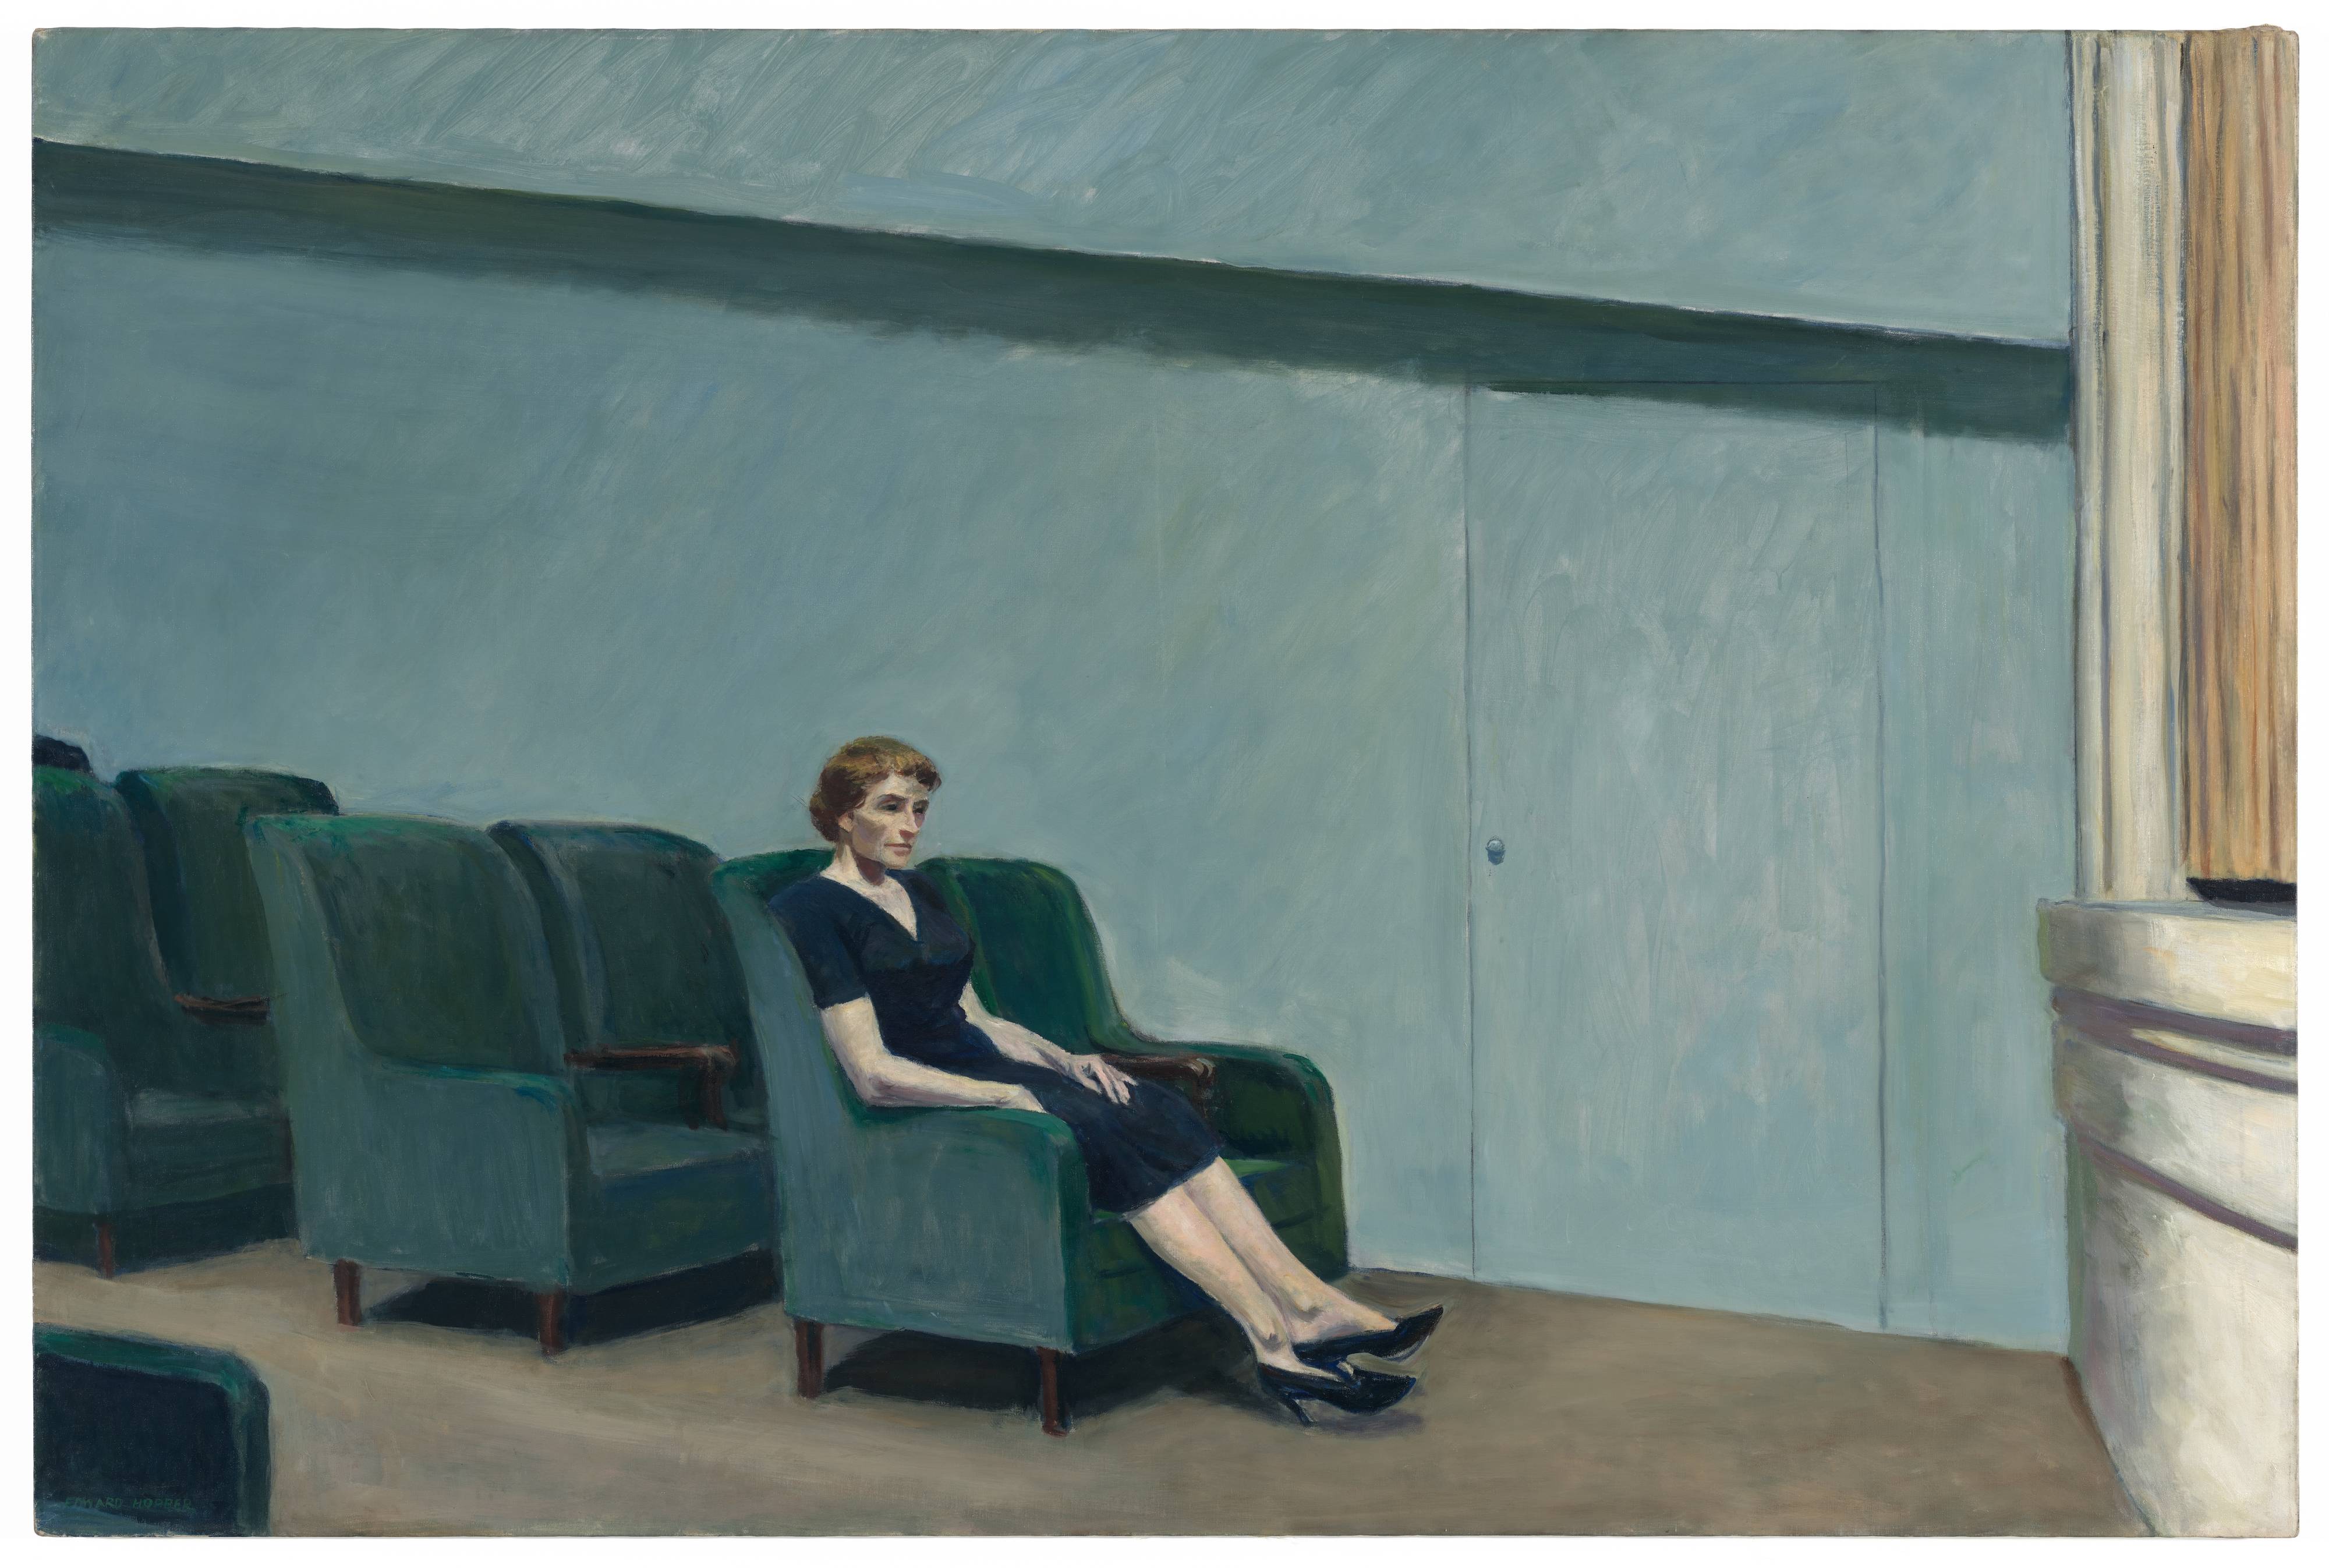 An interview with edward hopper june â american suburb x